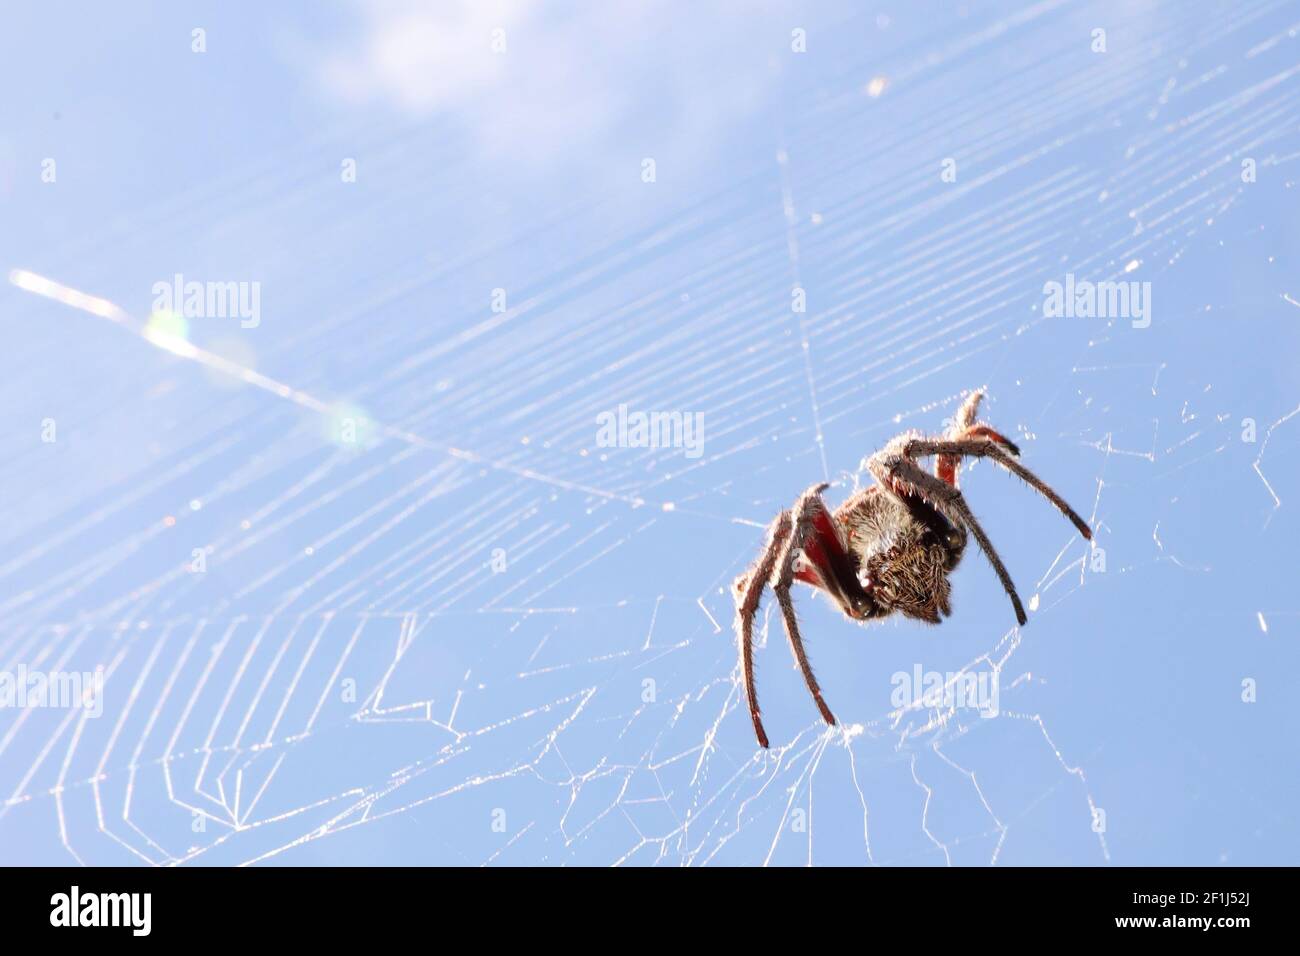 An interesting low angle look up at a large brown hairy spider in a white clean web. Isolated against a bright, clear sky daytime sky. Landscape - hor Stock Photo